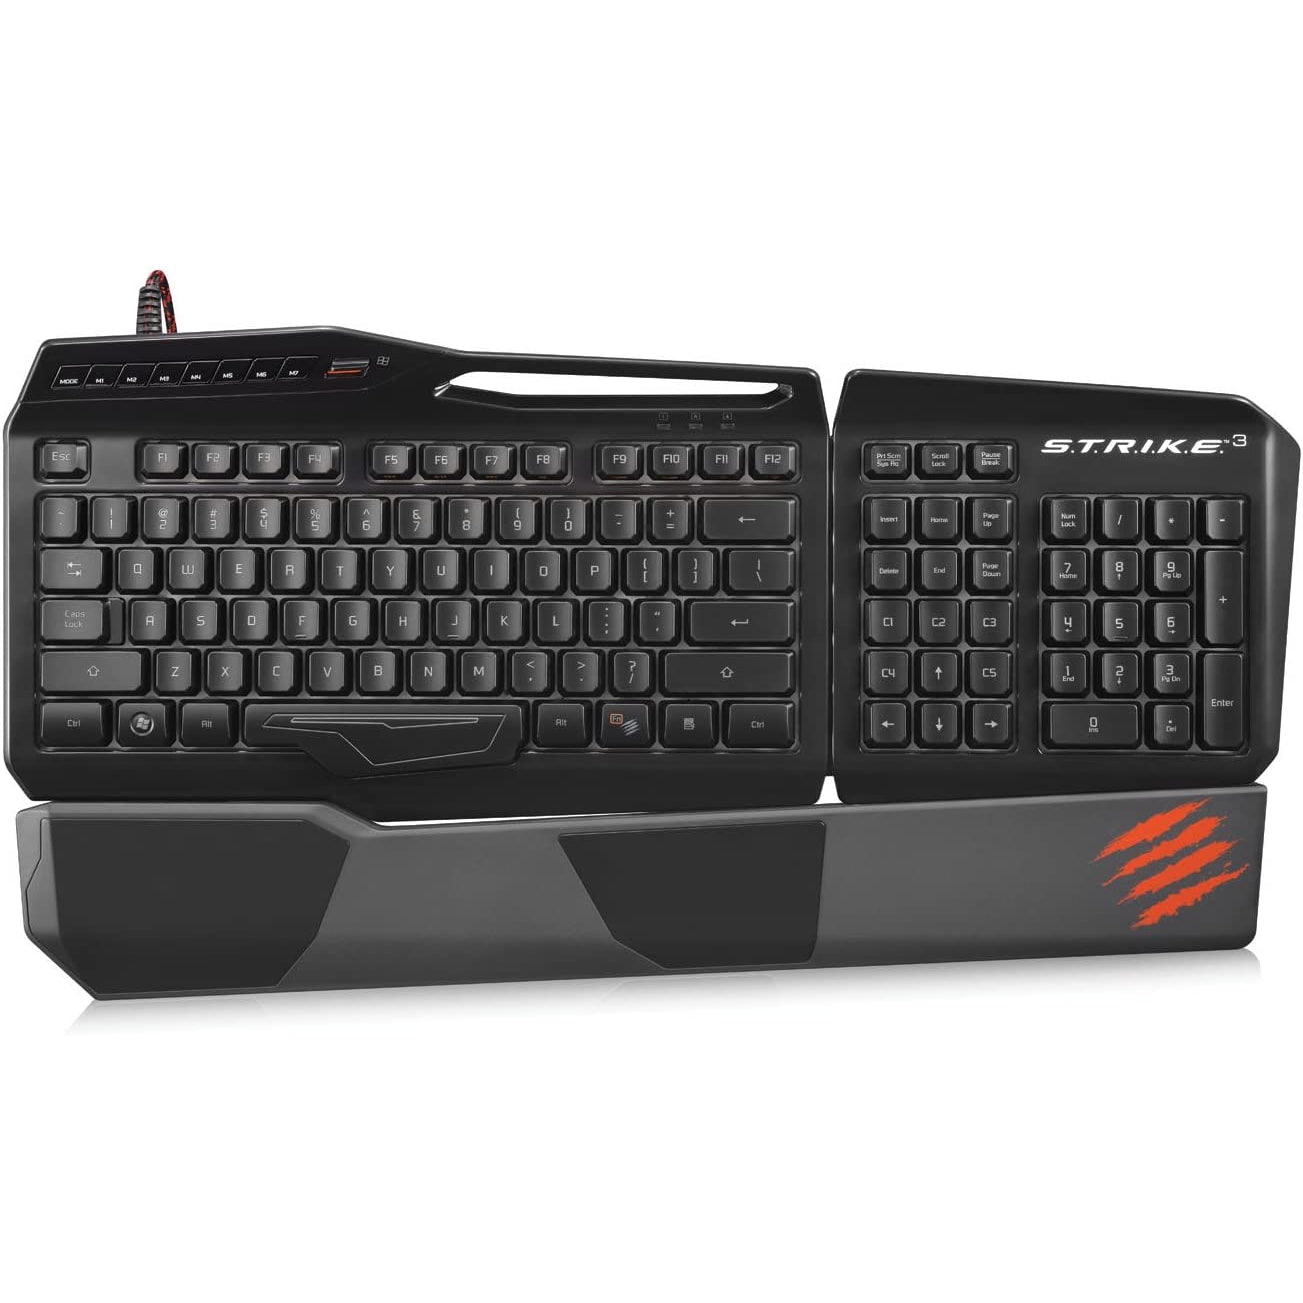 Mad Catz S.T.R.I.K.E.3 Gaming Keyboard